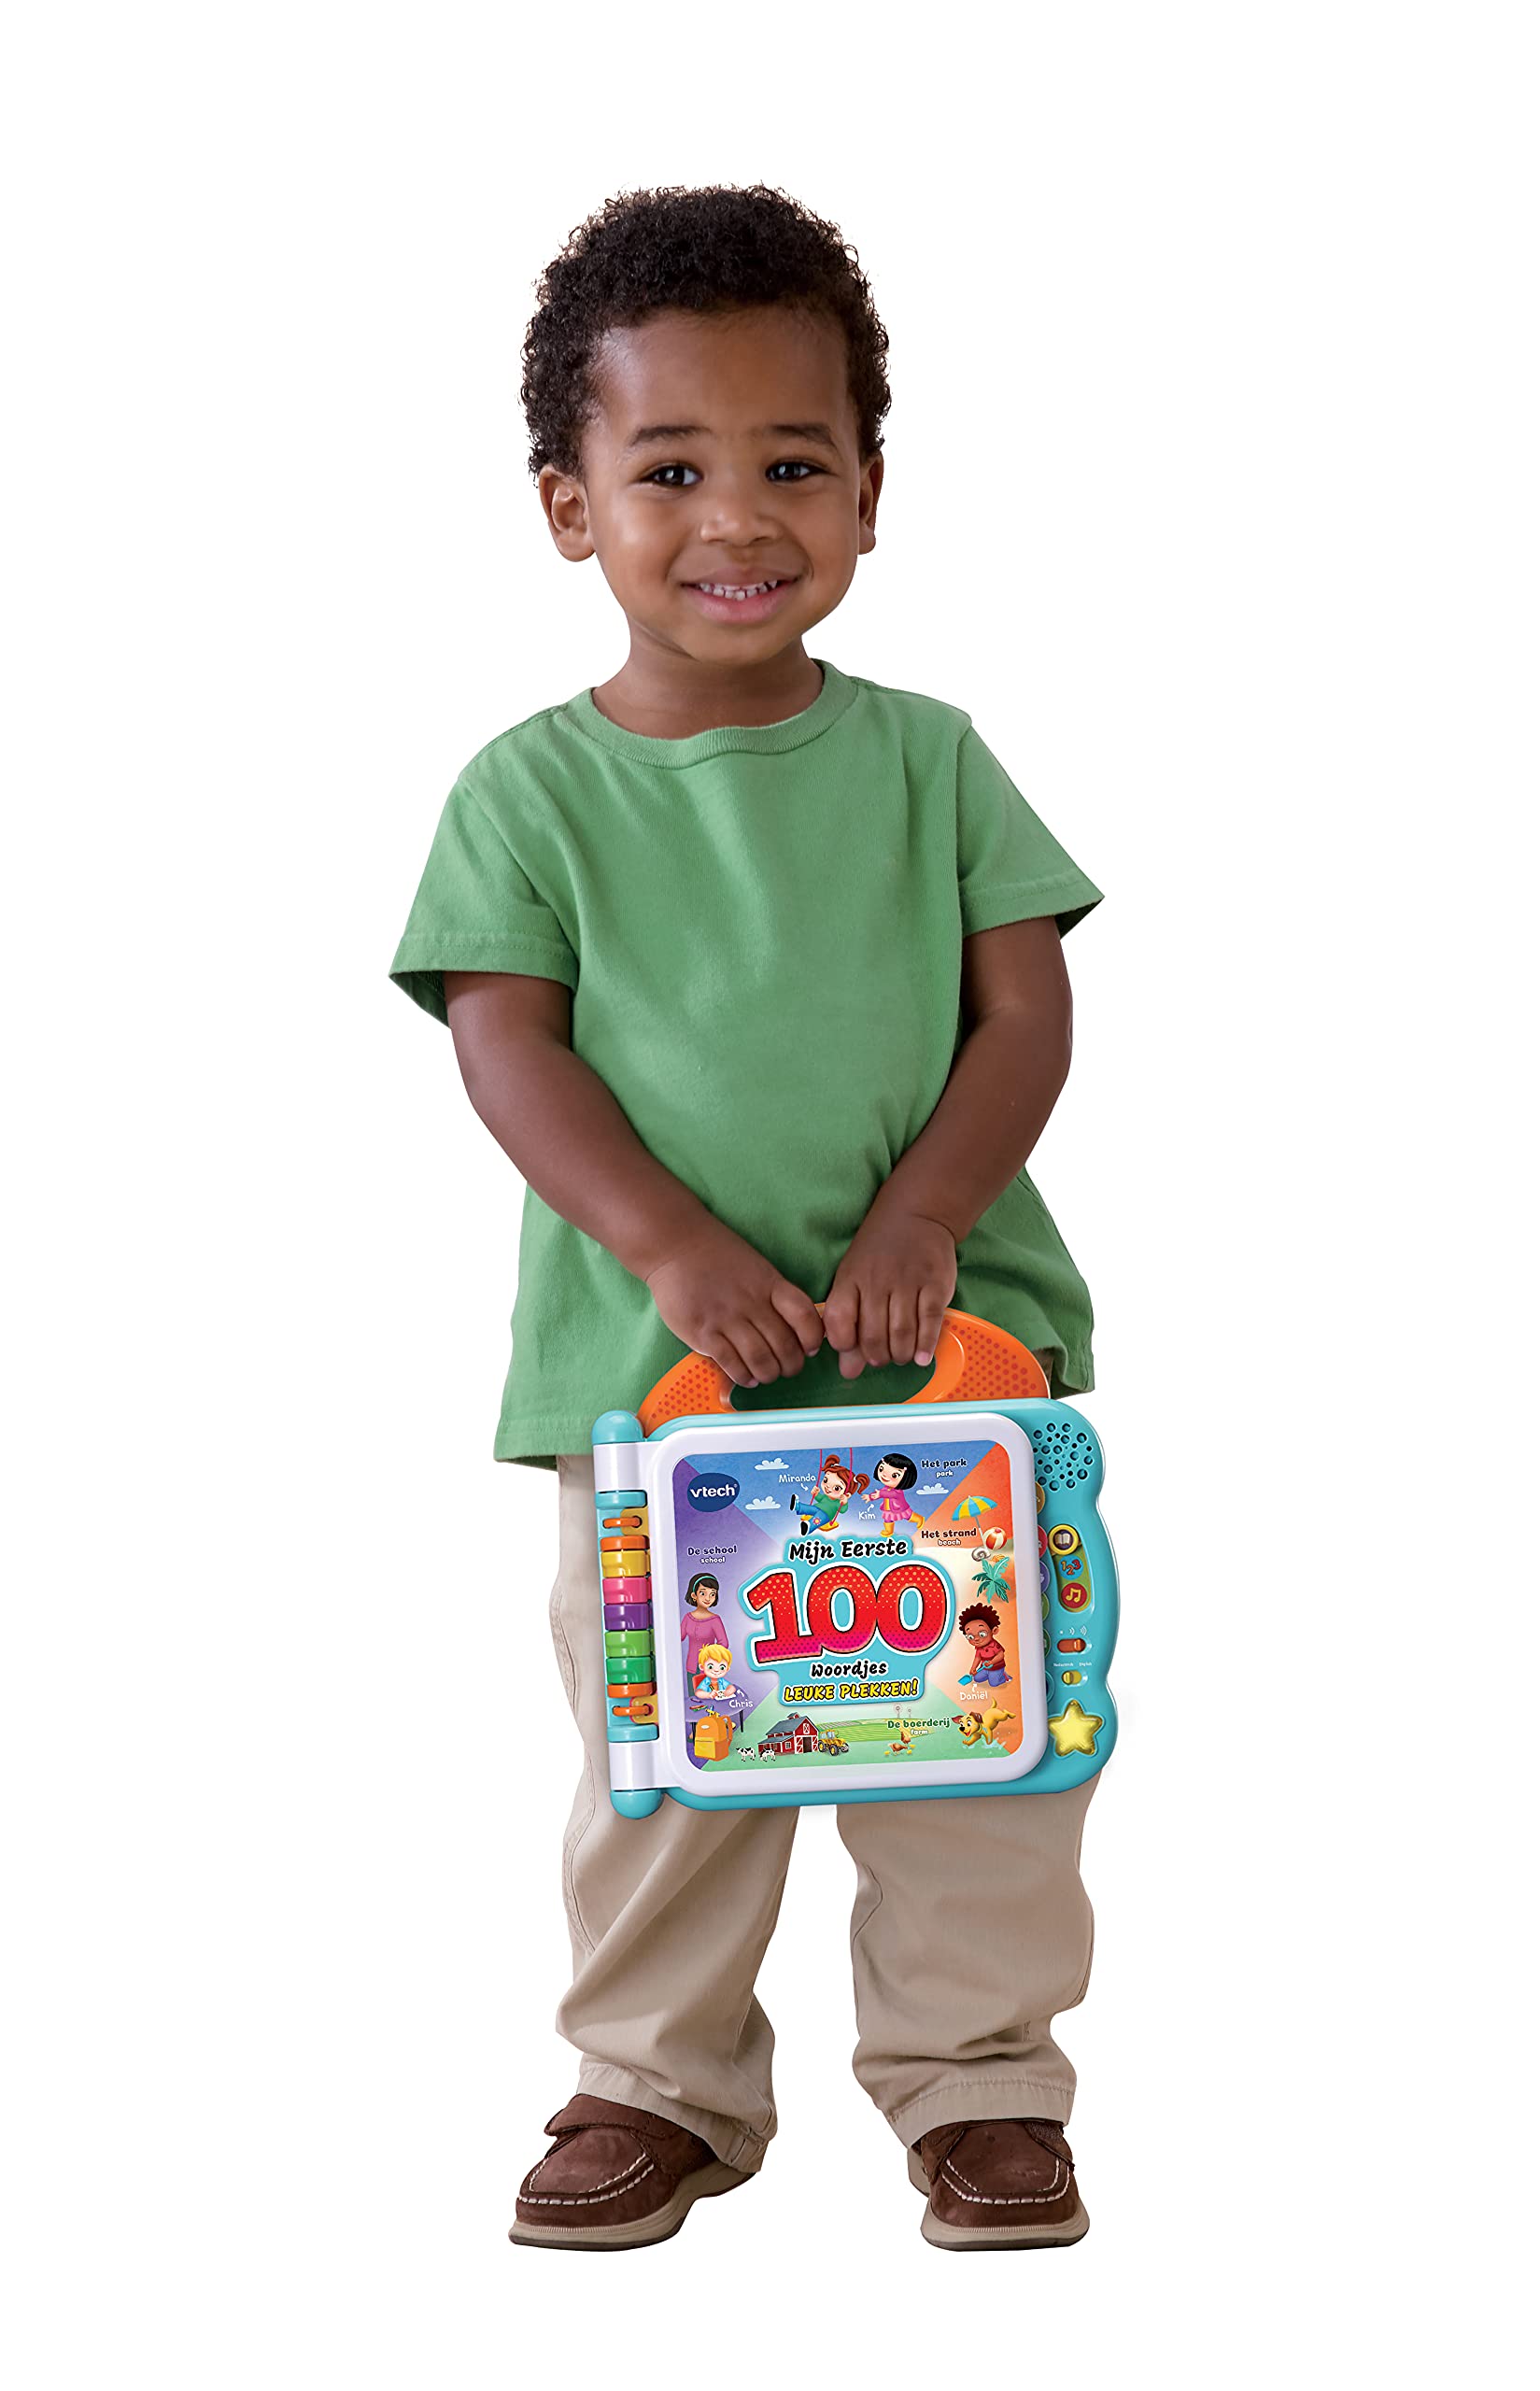 VTech 80-613042 - My First 100 Words - Fun Places NL-EN - for Boys and Girls - 1 to 4 Years - English Spoken and Written, Multicolors